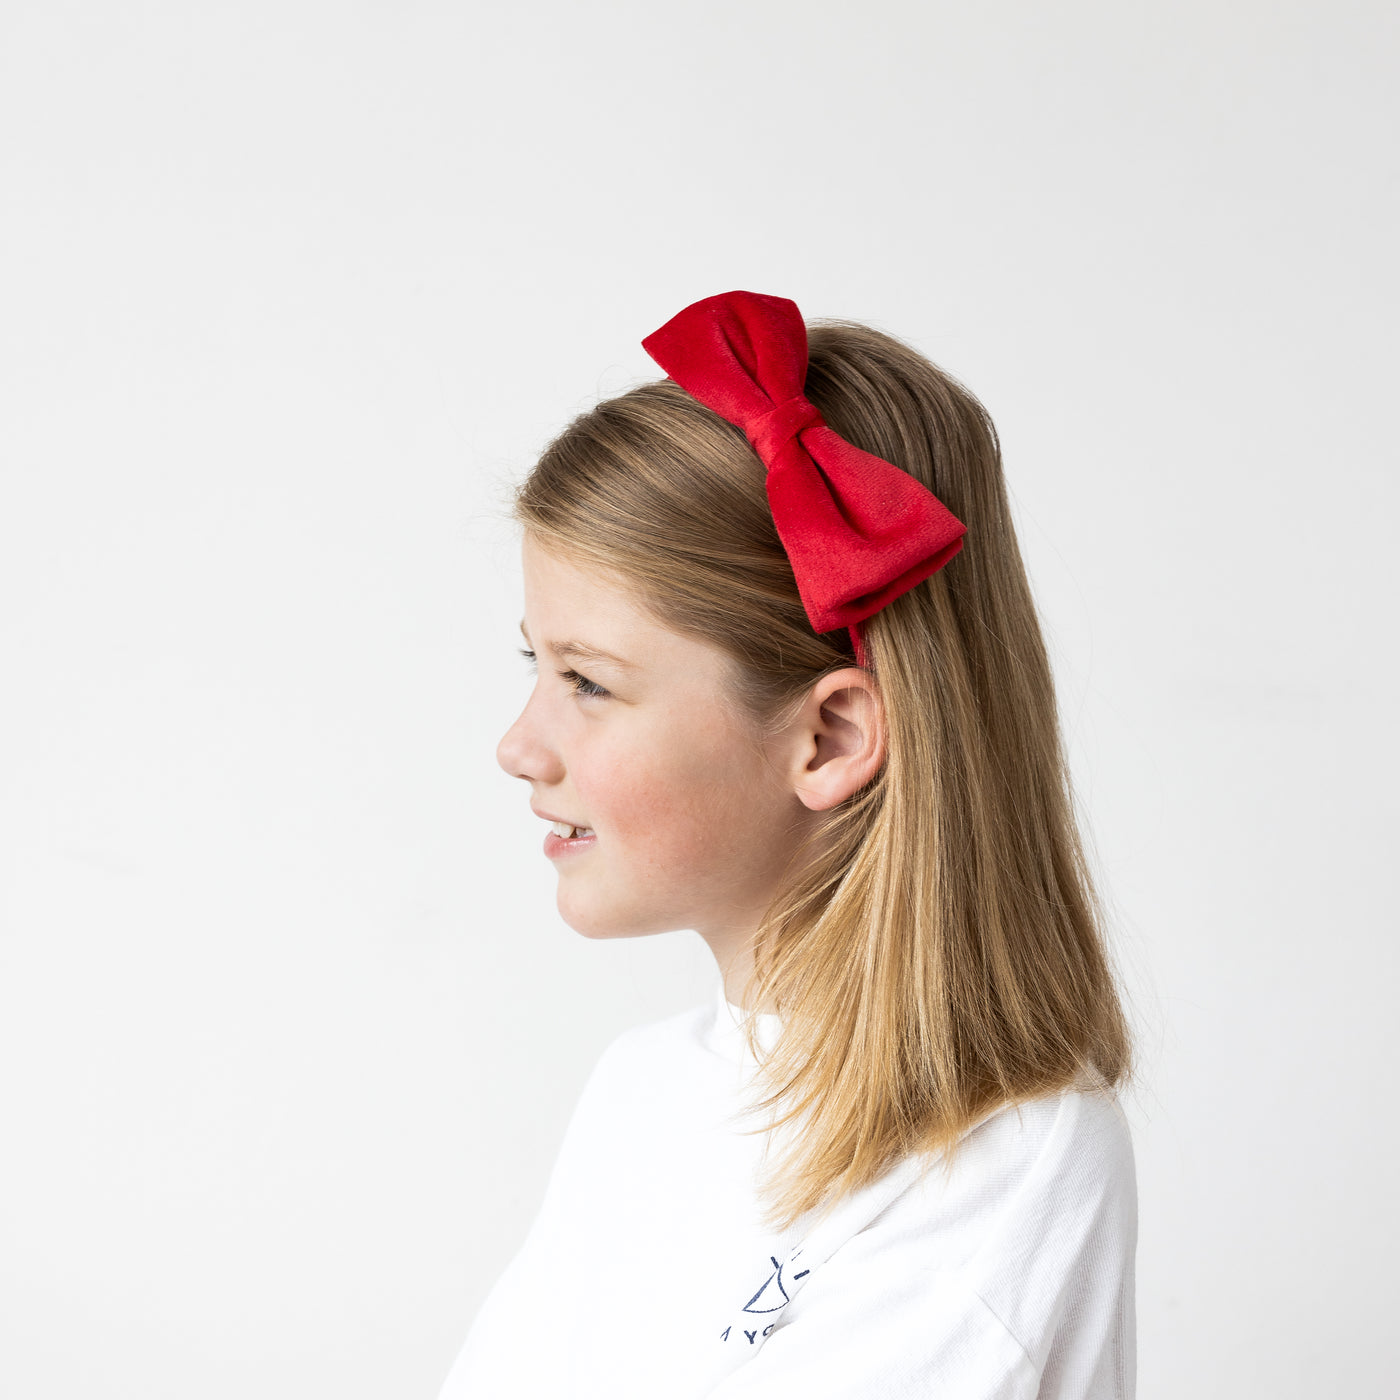 Smiling little girl wearing classic style red, velvet Alice band with bow